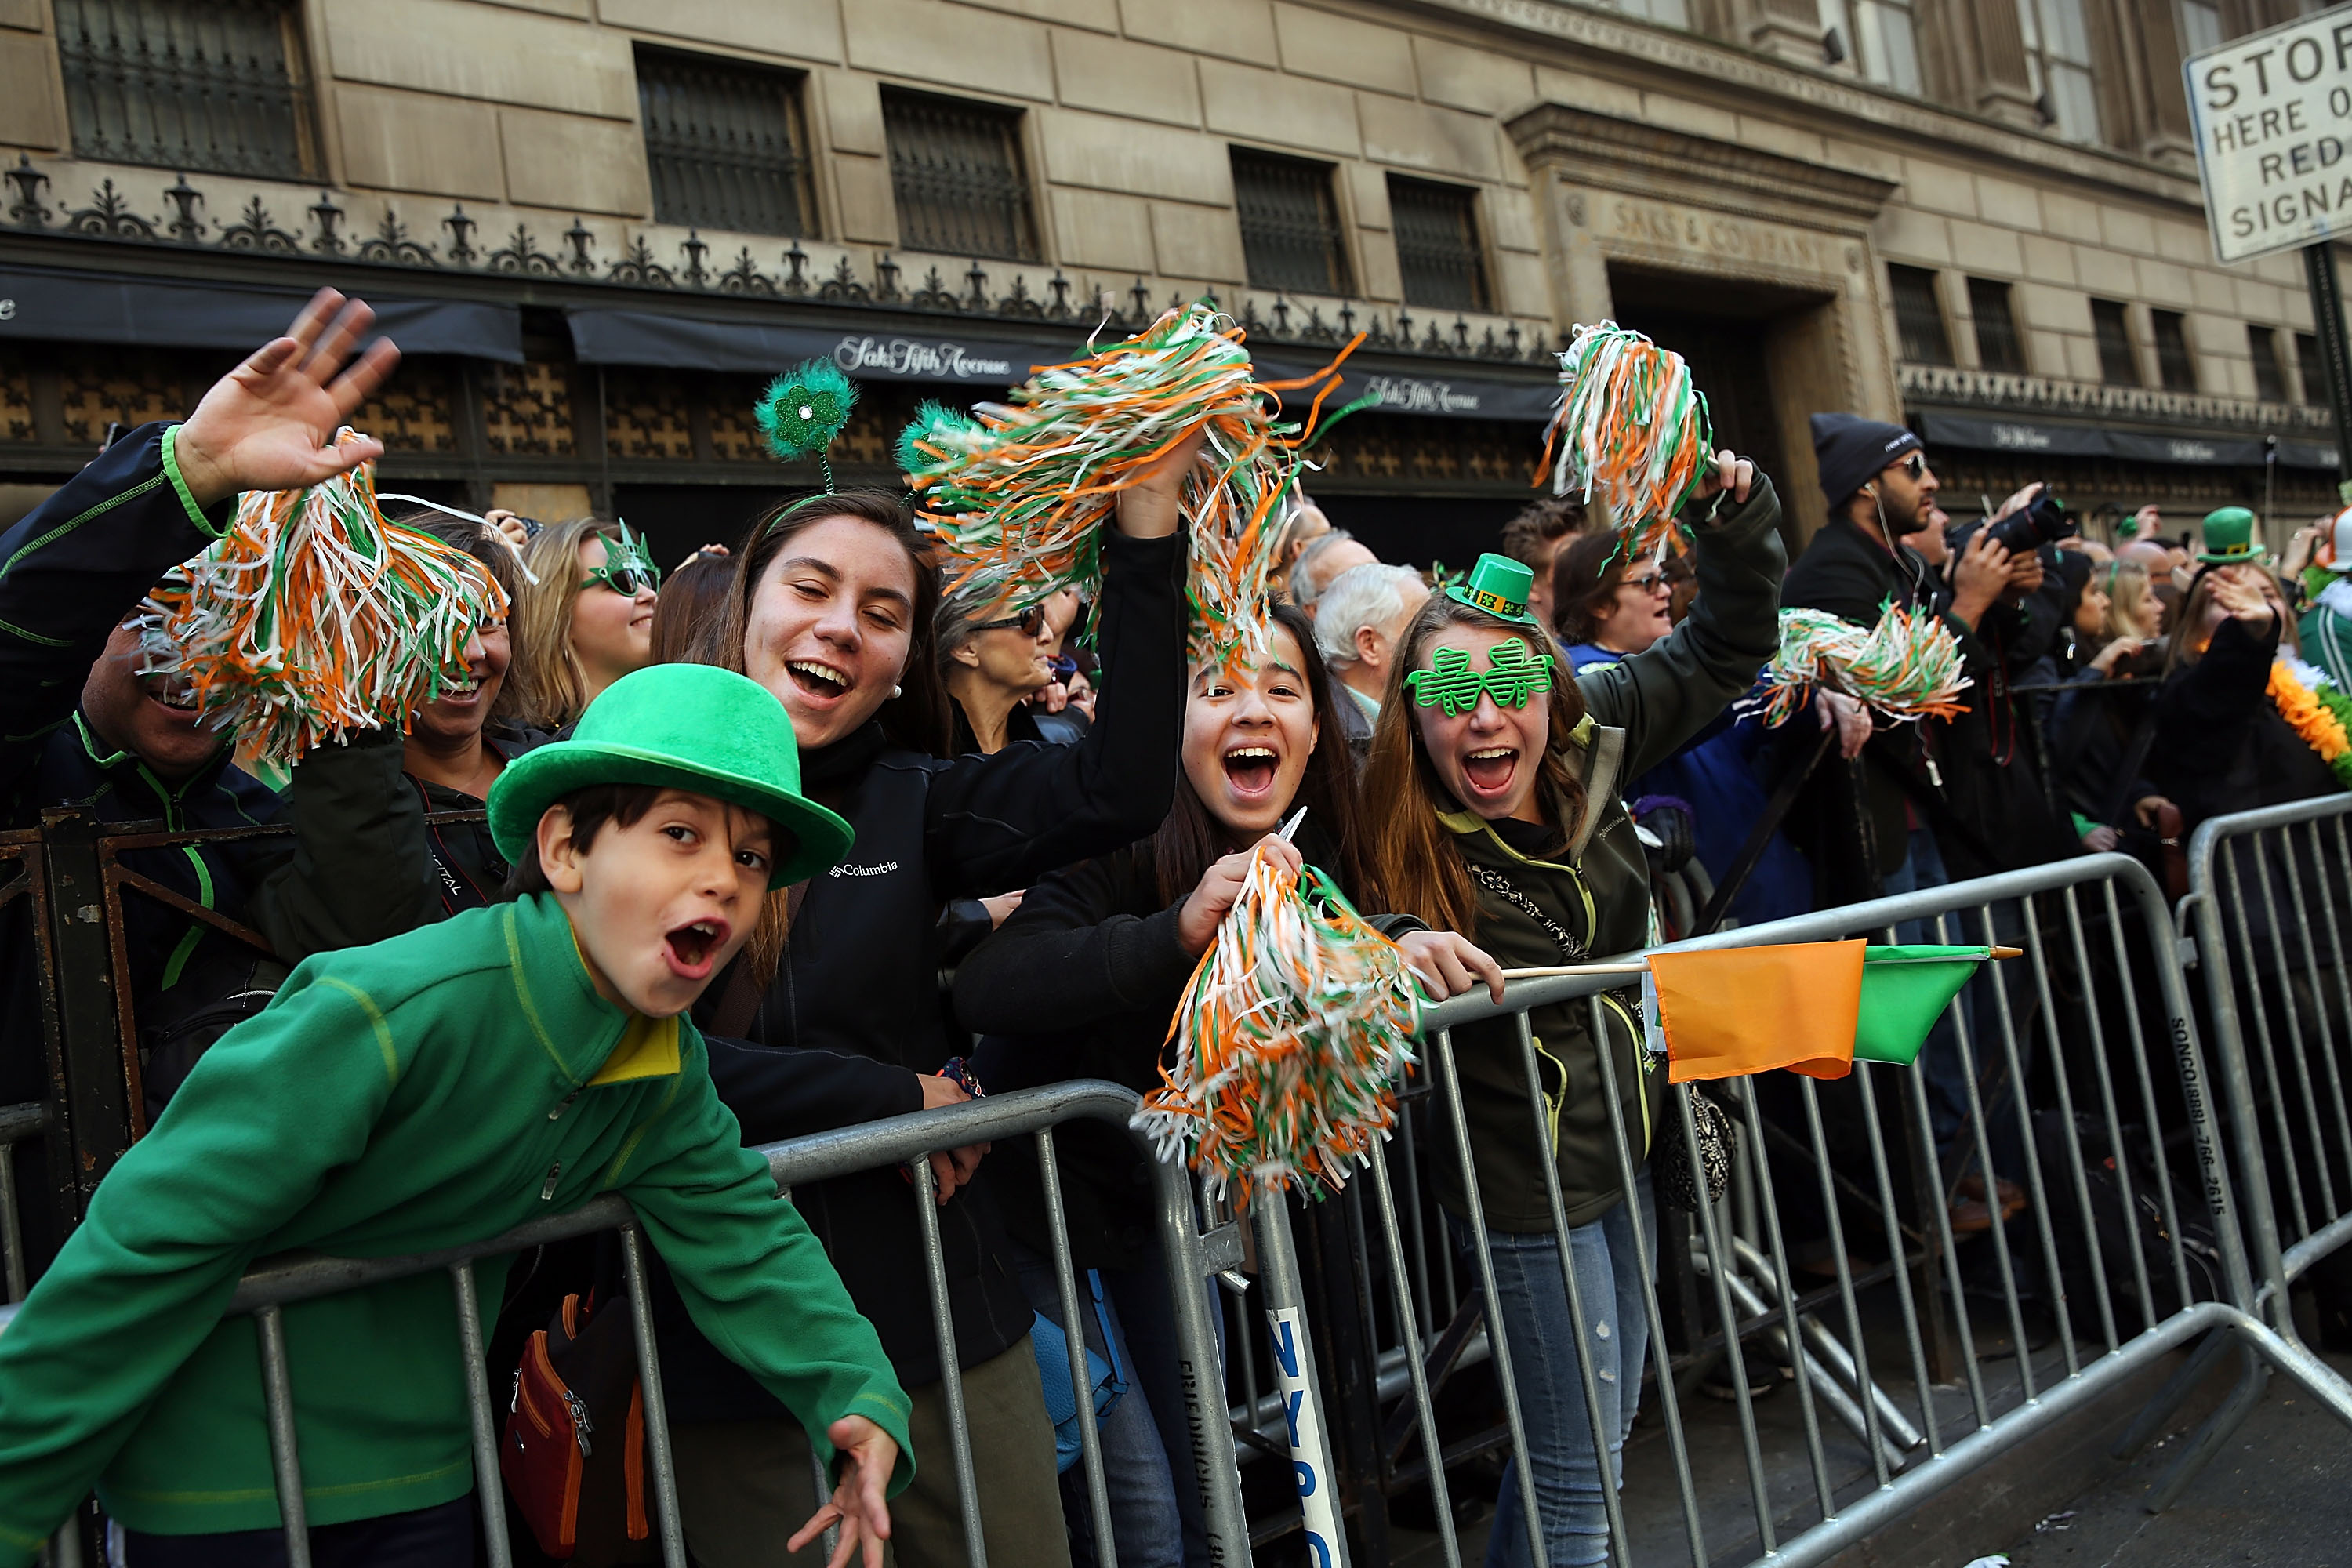 St. Patrick’s Day 2016 celebrated around the country